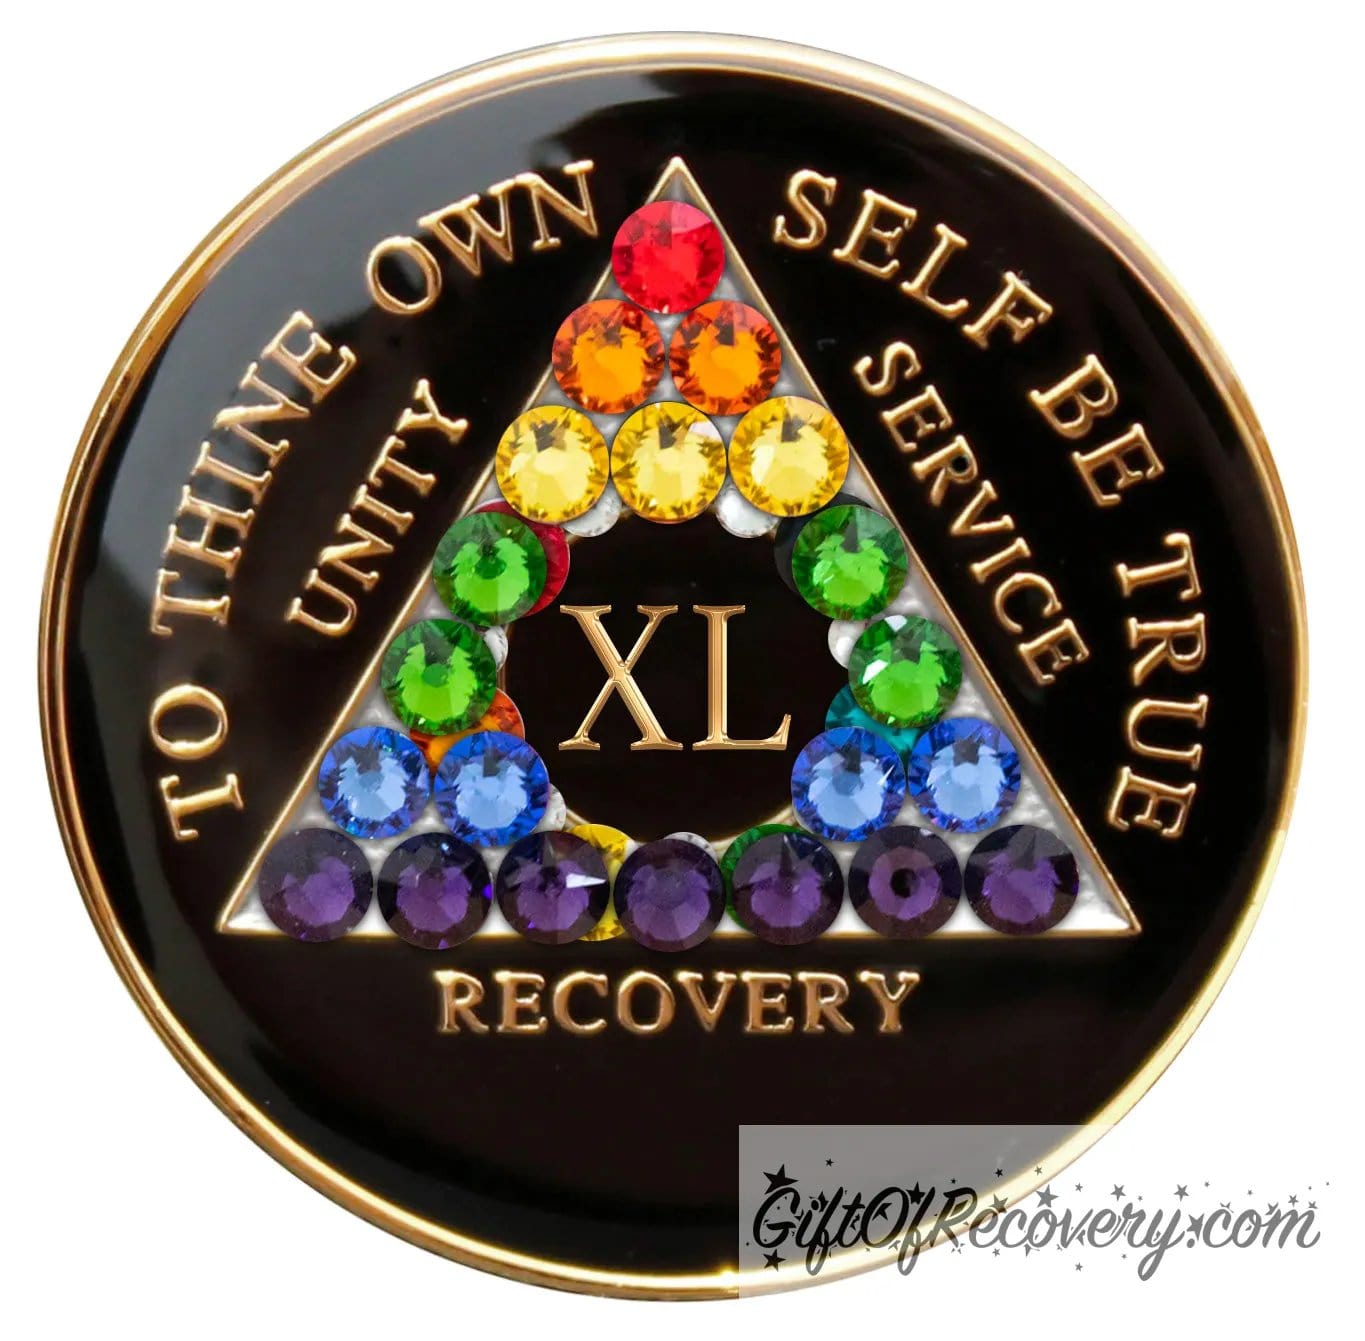 40 year AA medallion with 21 rainbow genuine crystals to represent the LBGTQIA+ community, show your pride with this Black onyx resin sealed recovery medallion that has 14k gold plated brass lettering of to thine own self be true, unity, service, recovery, and the roman numeral.